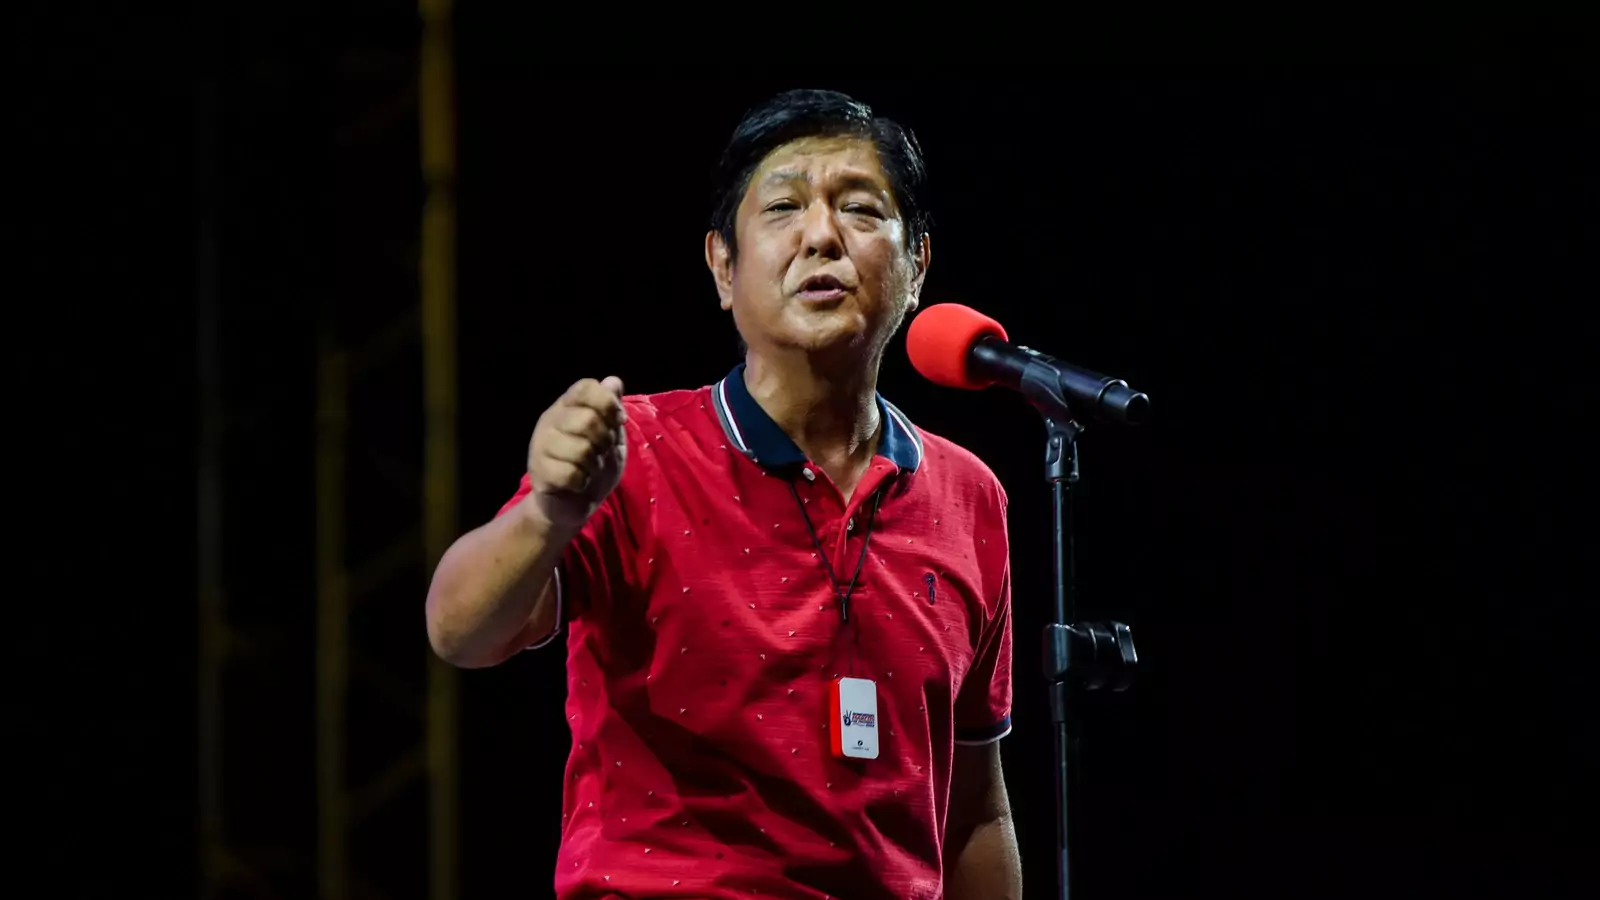 Philippine presidential candidate Ferdinand Marcos Jr., son of late dictator Ferdinand Marcos, gestures as he speaks during a campaign rally in Quezon City, Metro Manila, Philippines, on February 14, 2022.